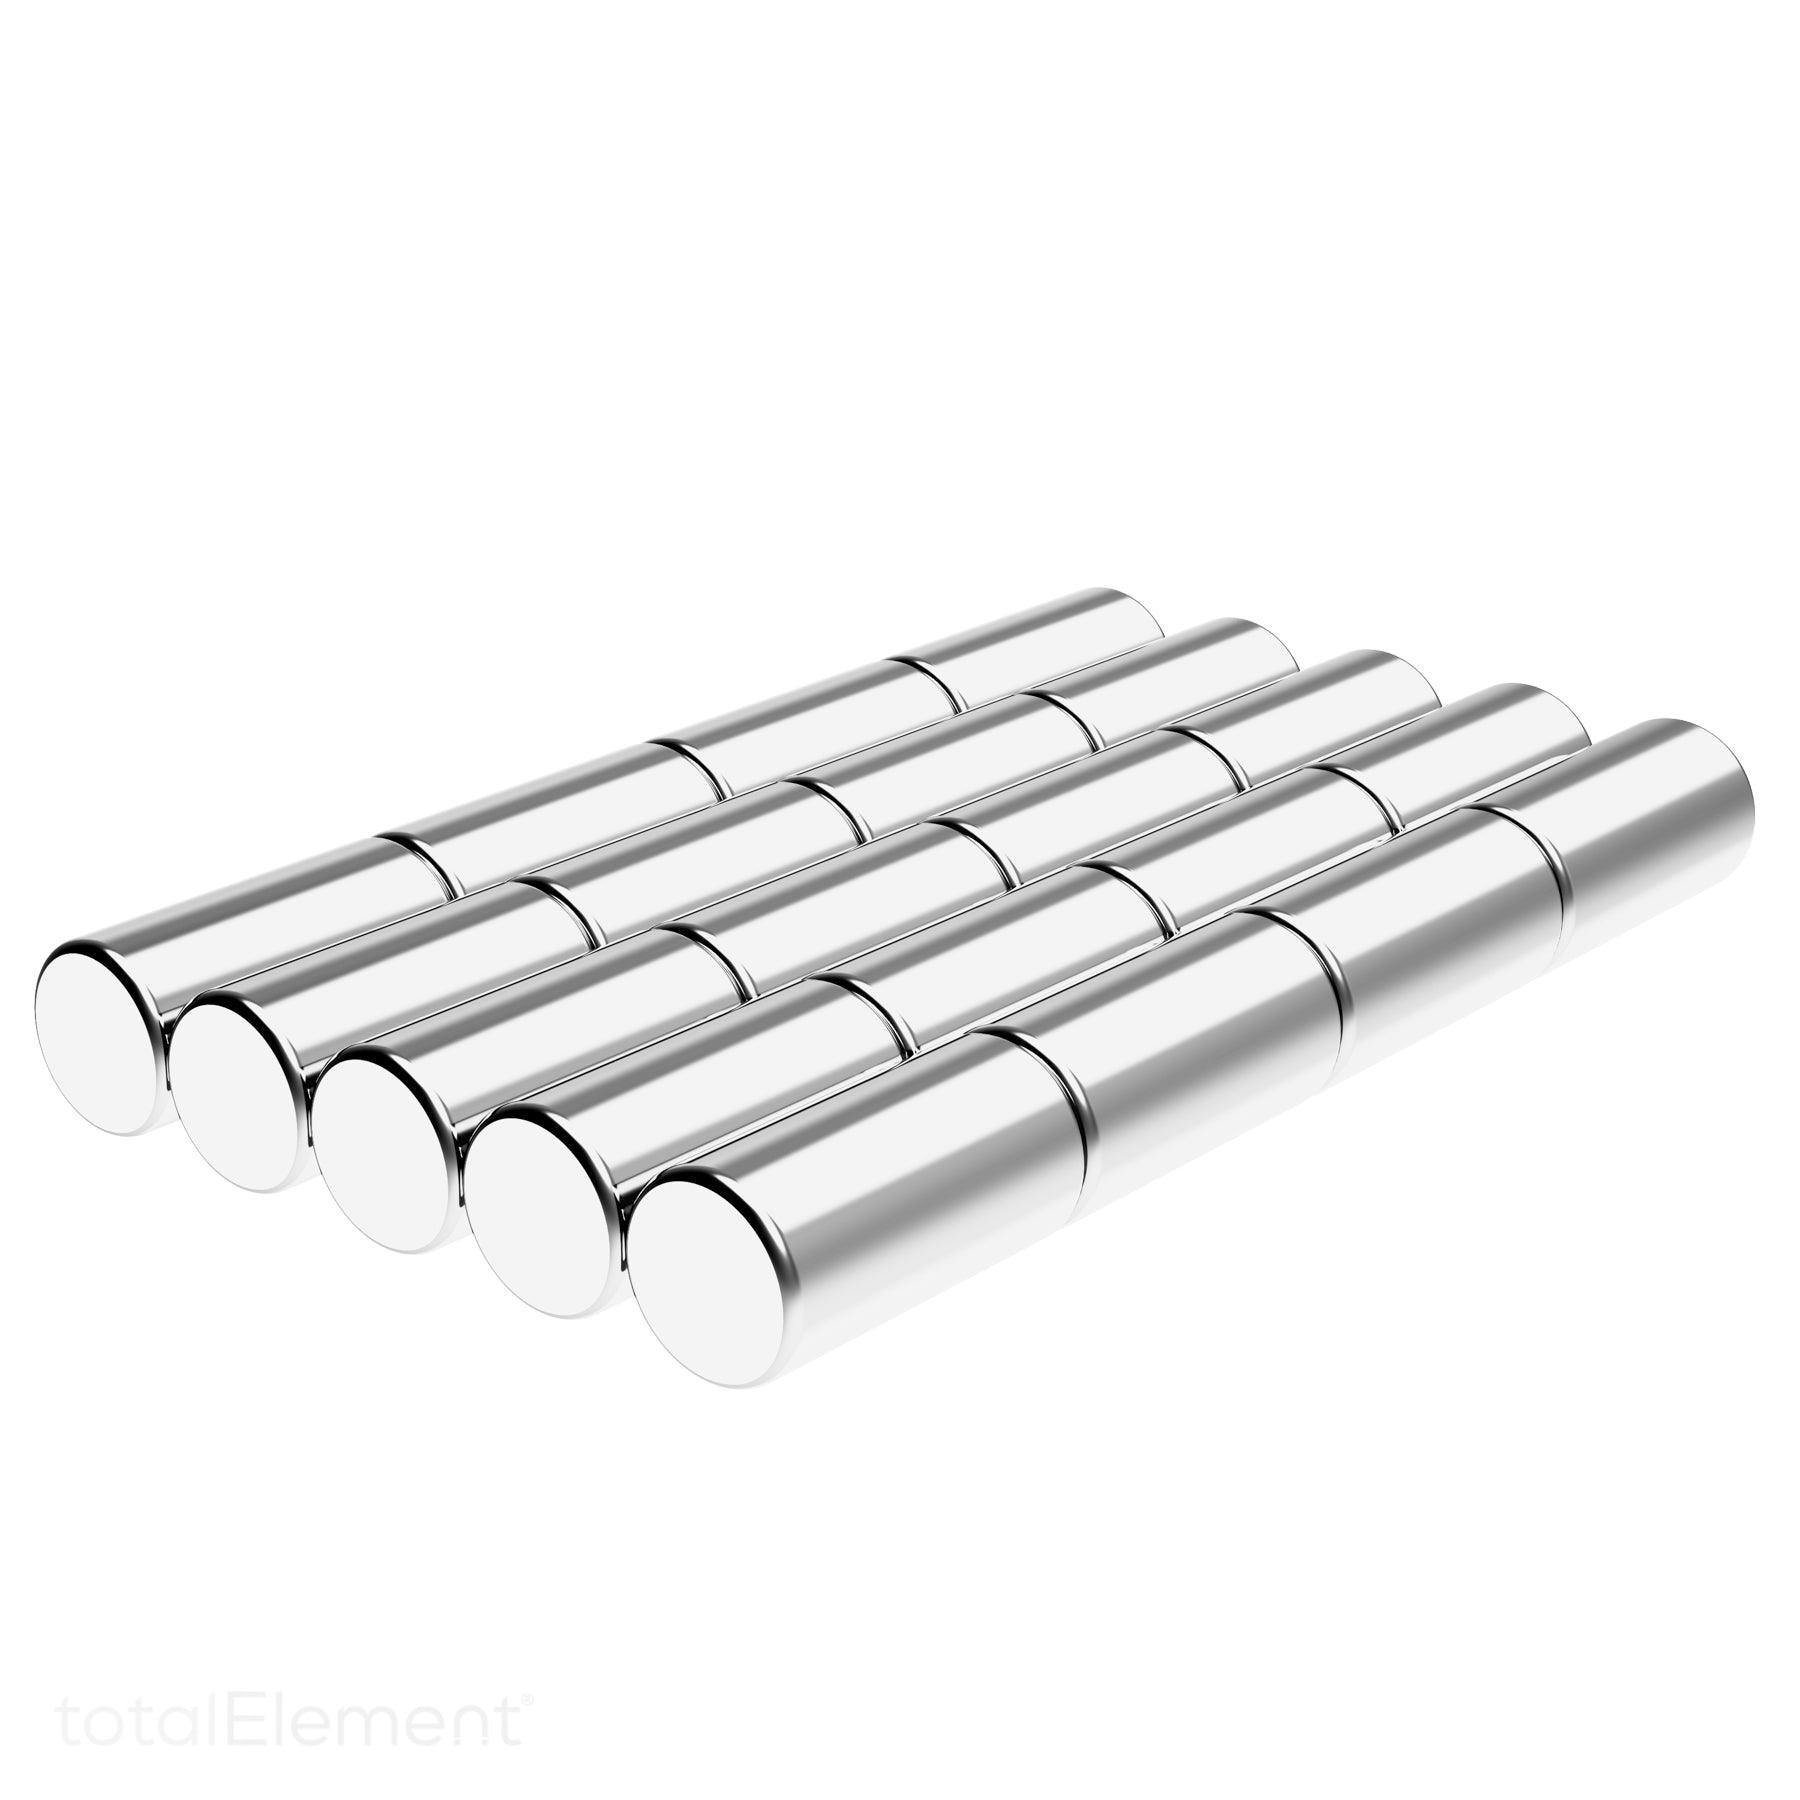 1/4 x 1/2 inch Neodymium Rare Earth Cylinder/Rod Magnets N52 (20 Pack)